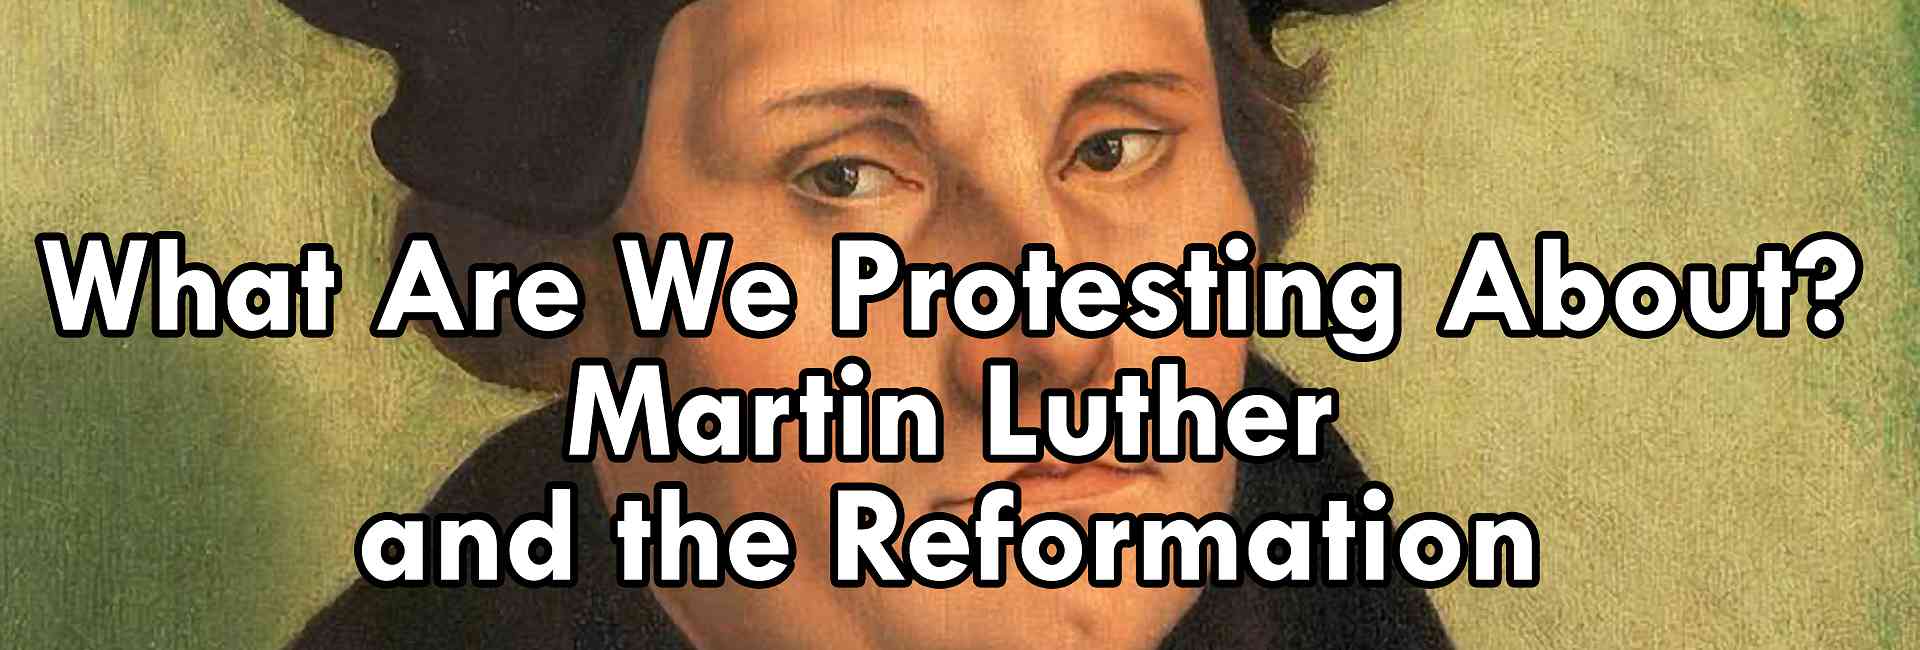 What Are We Protesting About? Martin Luther and the Reformation